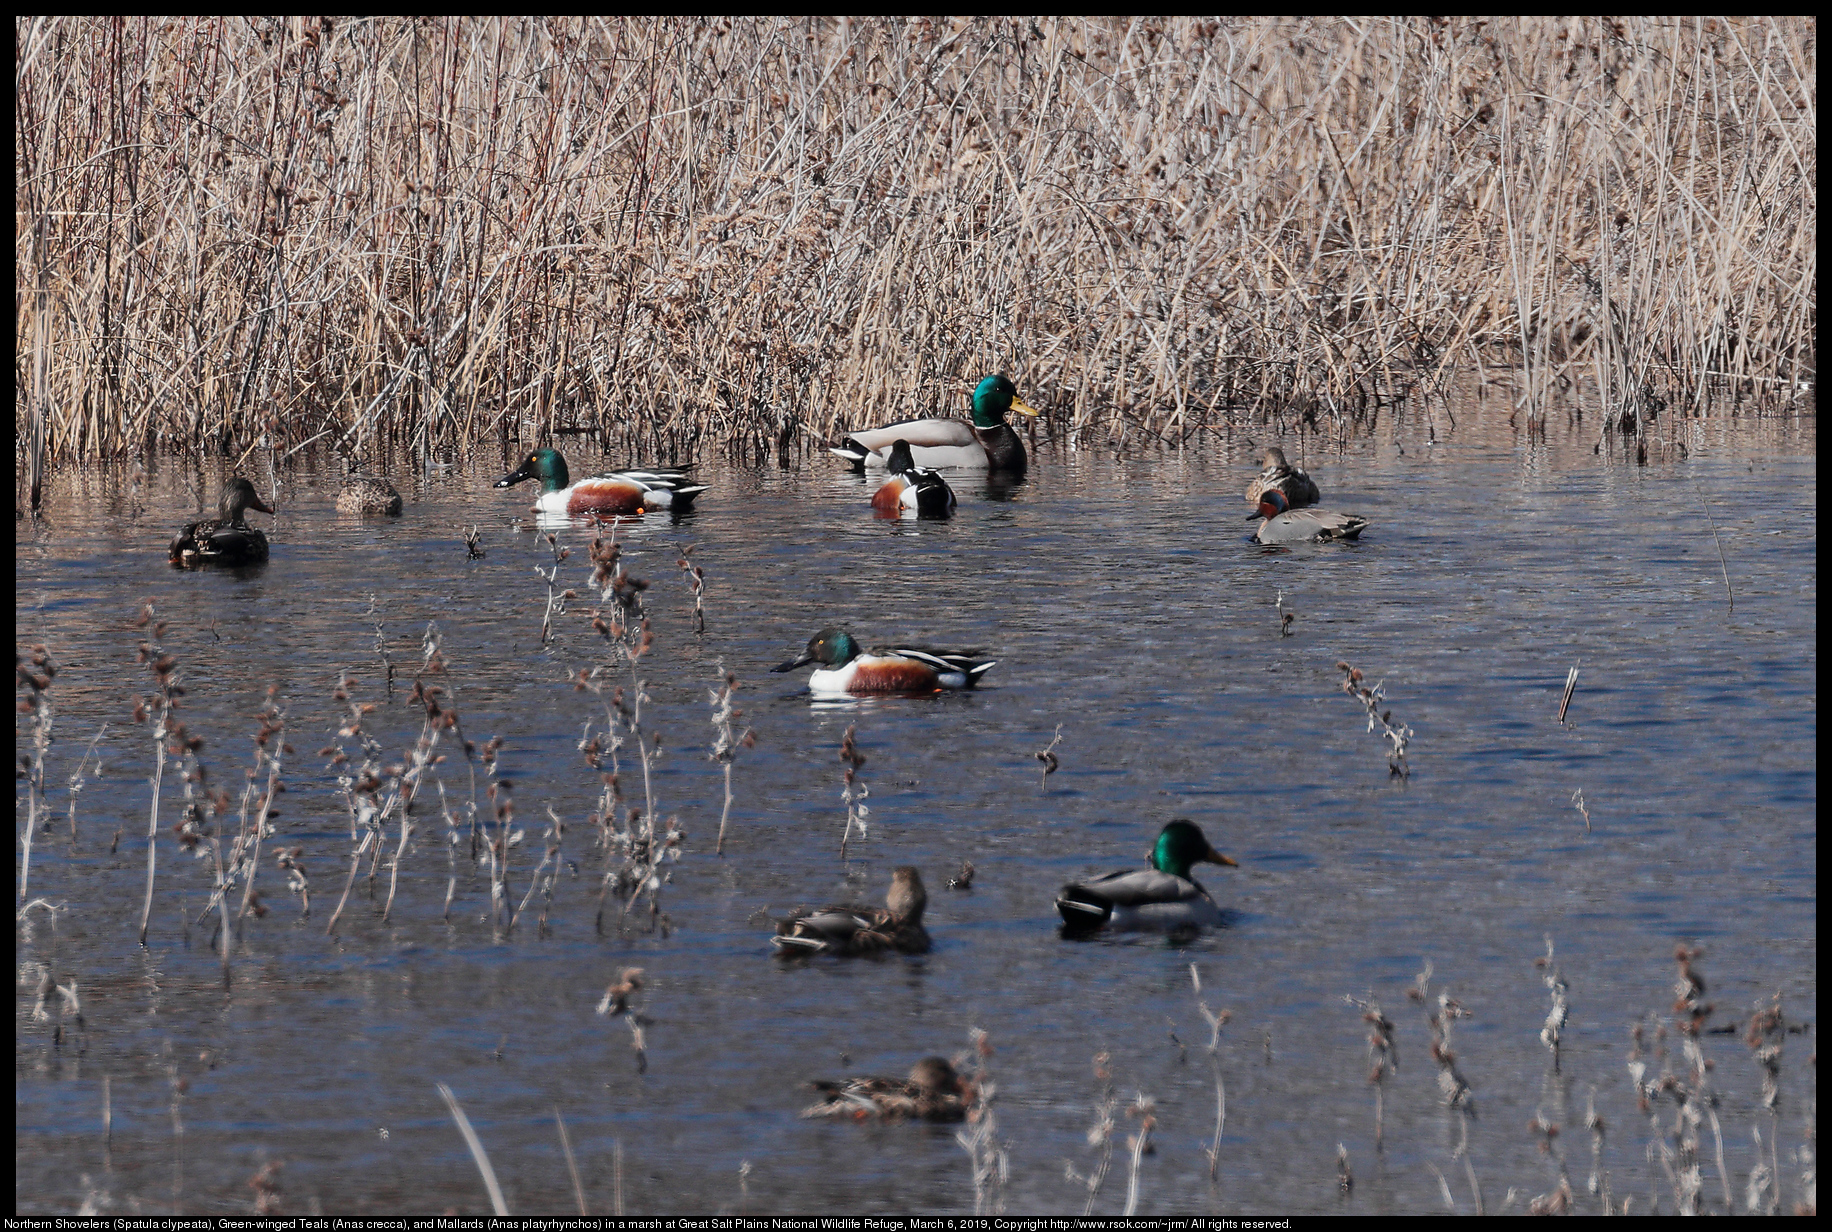 Northern Shovelers (Spatula clypeata), Green-winged Teals (Anas crecca), and Mallards (Anas platyrhynchos) in a marsh at Great Salt Plains National Wildlife Refuge, March 6, 2019